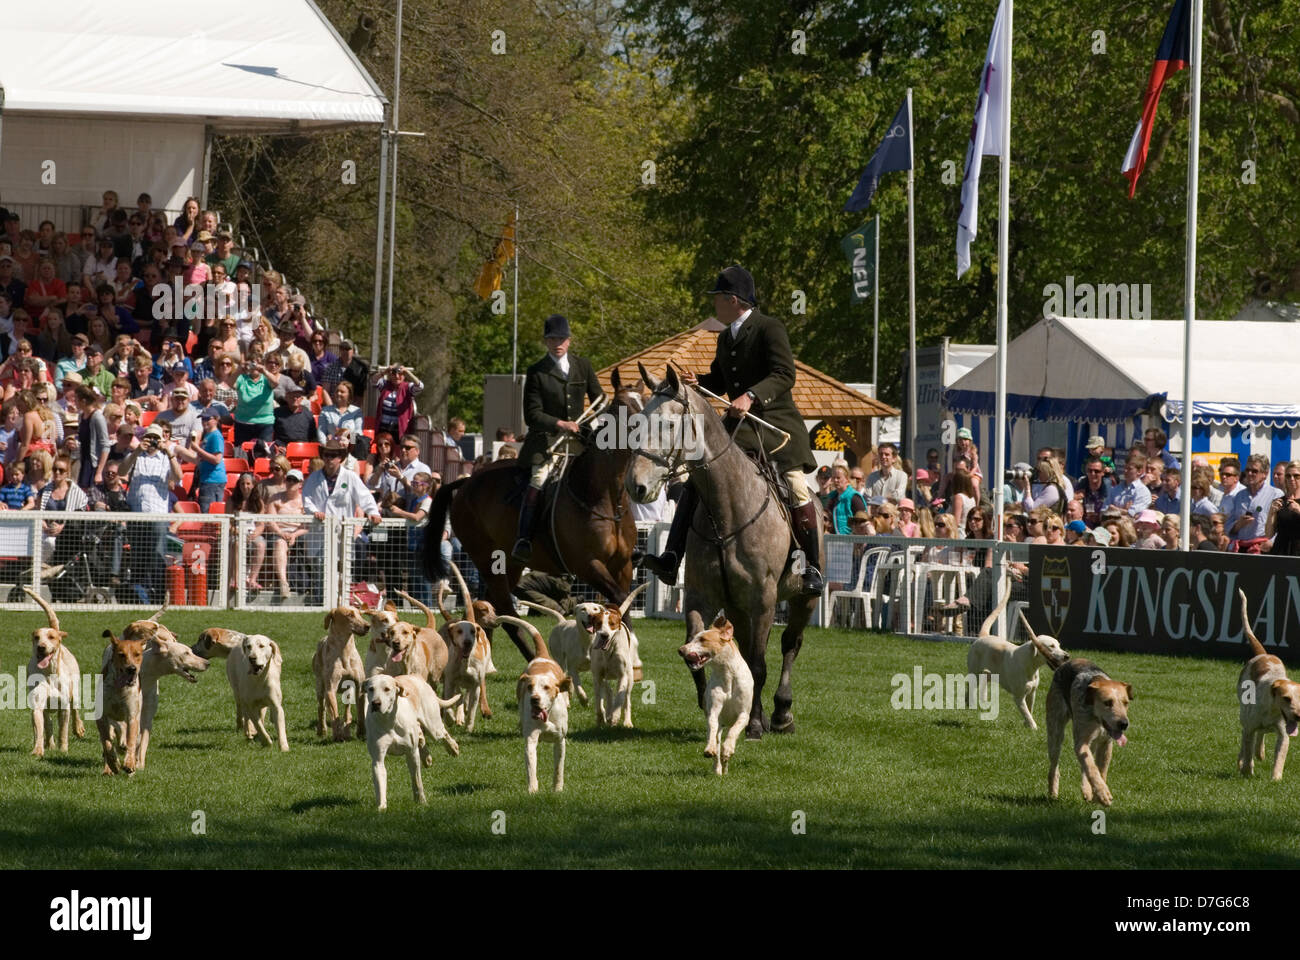 Badminton Horse Trials Gloucestershire UK. The Parade of Hounds in the Main arena. HOMER SYKES Stock Photo